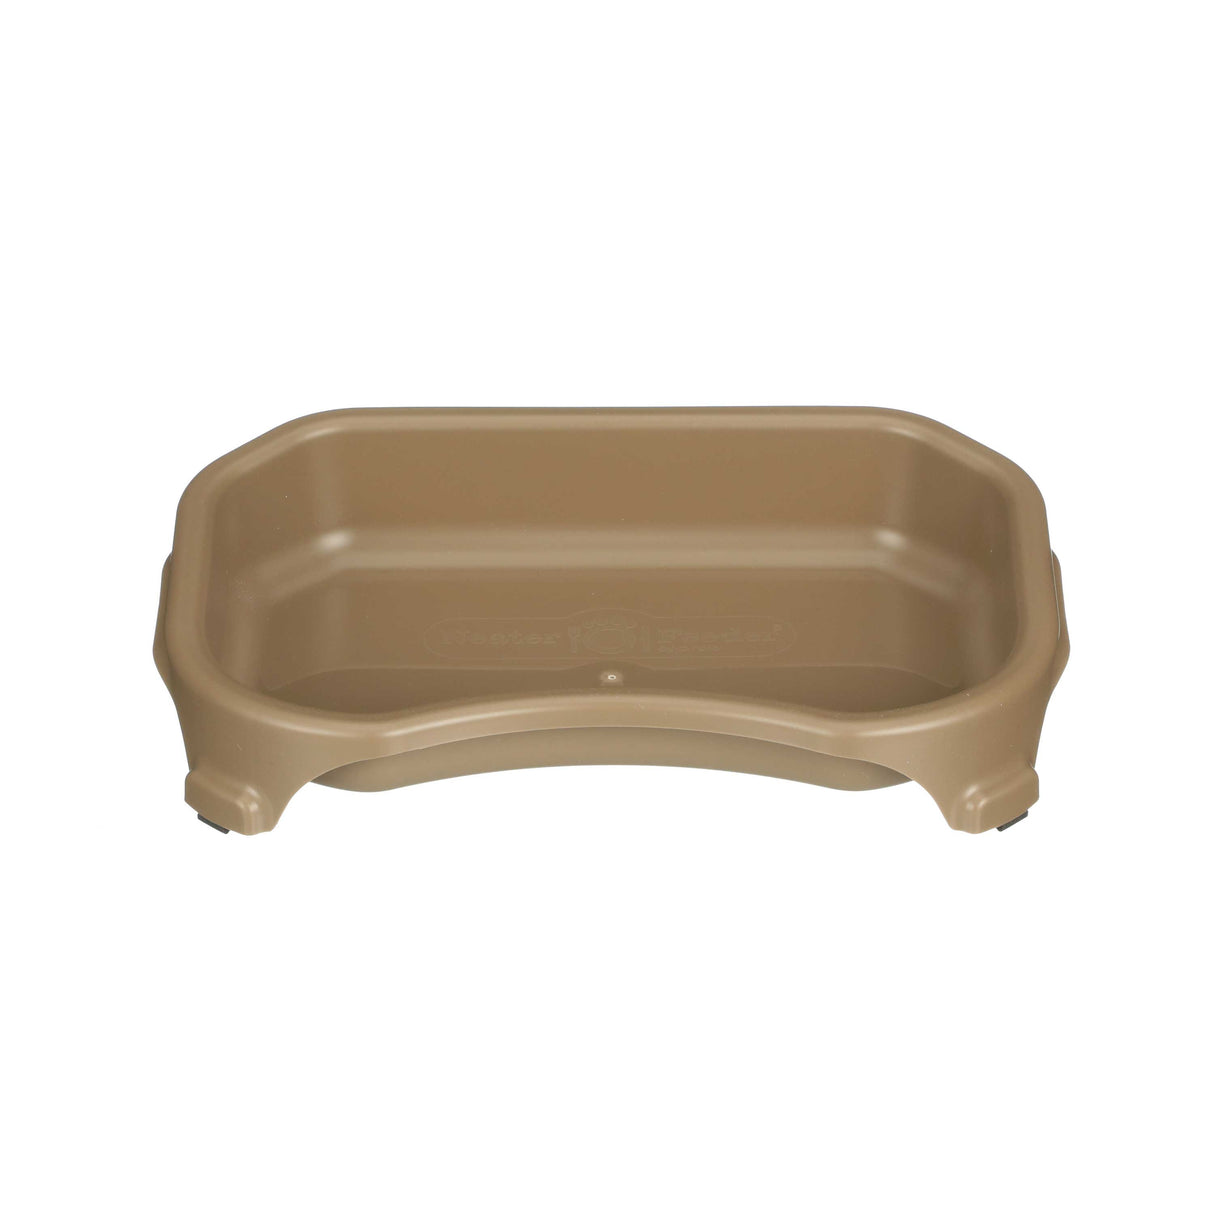 Neater Pets Big Bowl for Dogs - Plastic Trough Style Food or Water Bowl,  Champagne, 1.25 Gallon (160 oz.) 